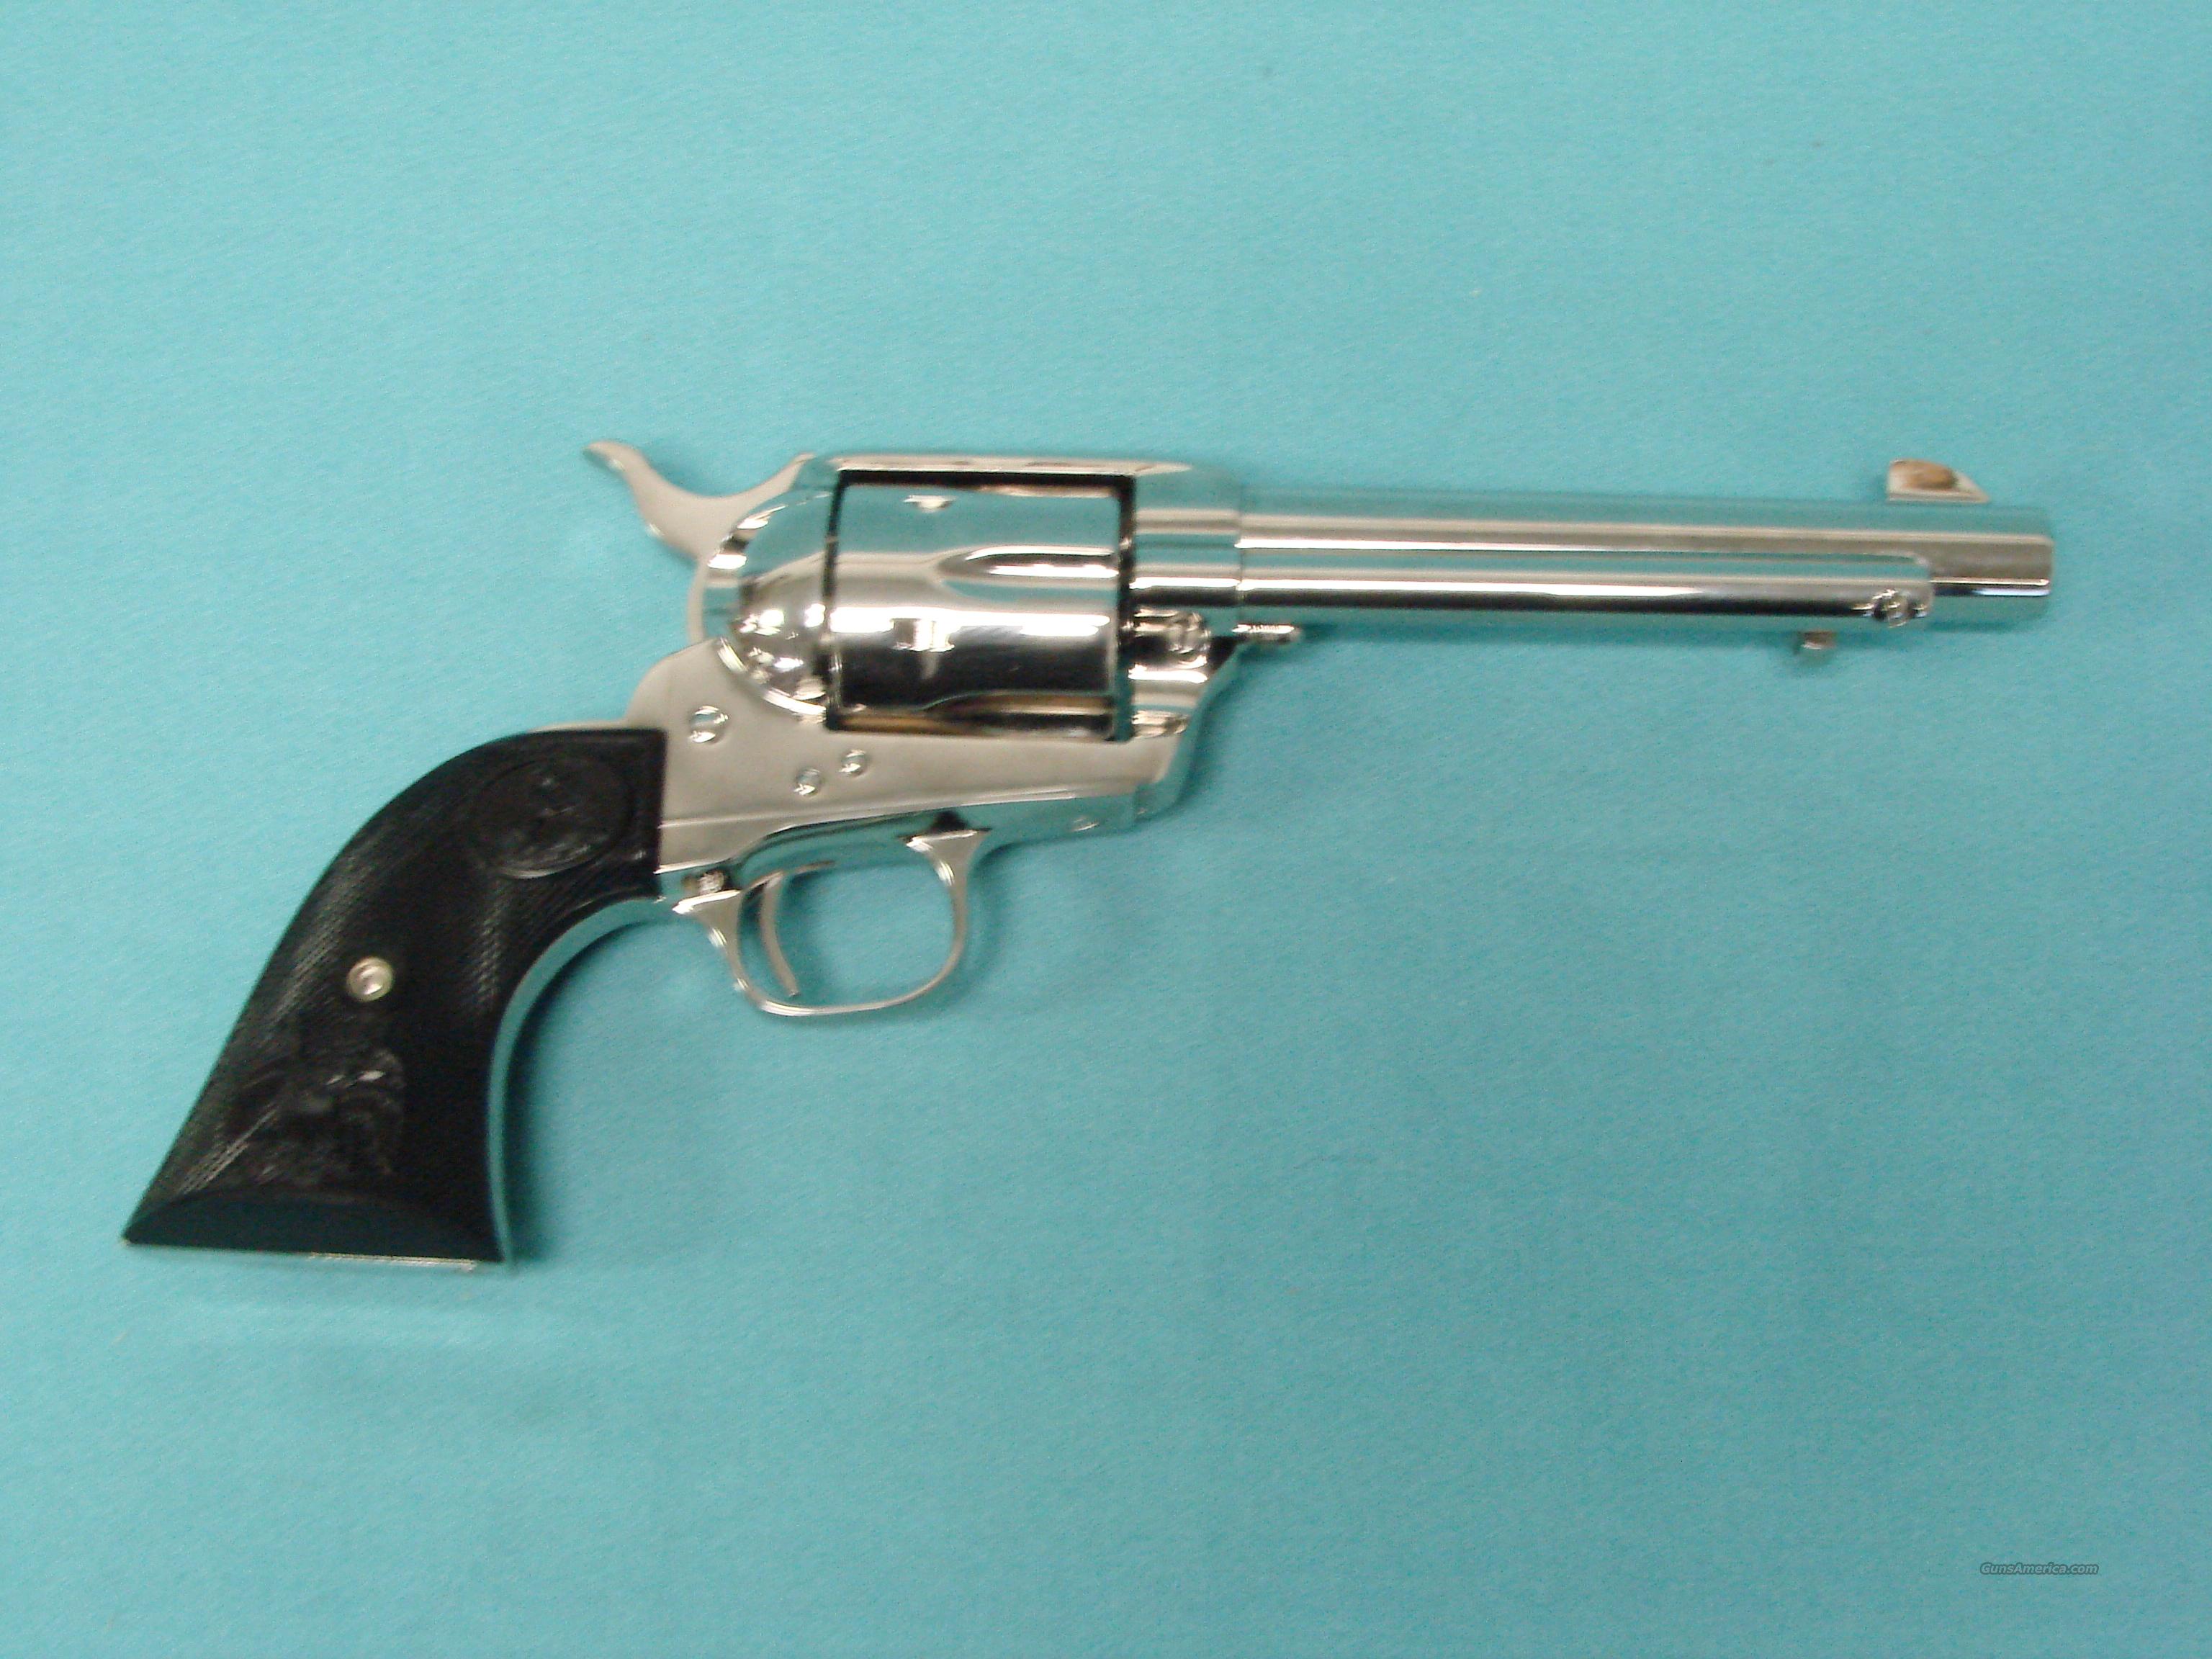 Colt Single Action Army Nickel 44-4... for sale at Gunsamerica.com ...